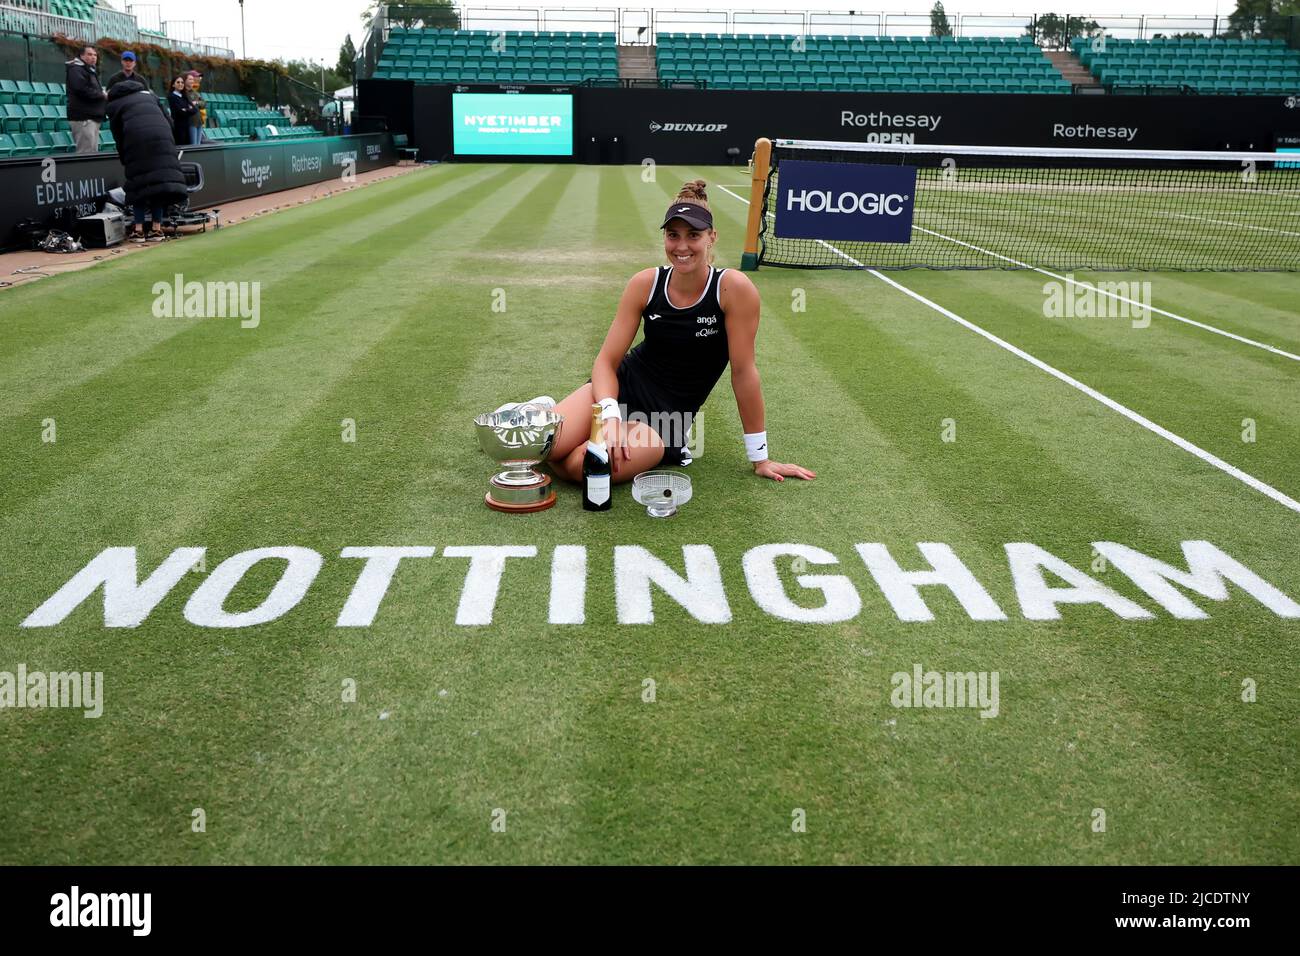 Nottingham Tennis Centre, Nottingham, England: 12th June 2022;  Rothesay Open Nottingham Lawn Tennis tournament; Beatriz Haddad Maia celebrates with both the womens singles and doubles trophys Stock Photo